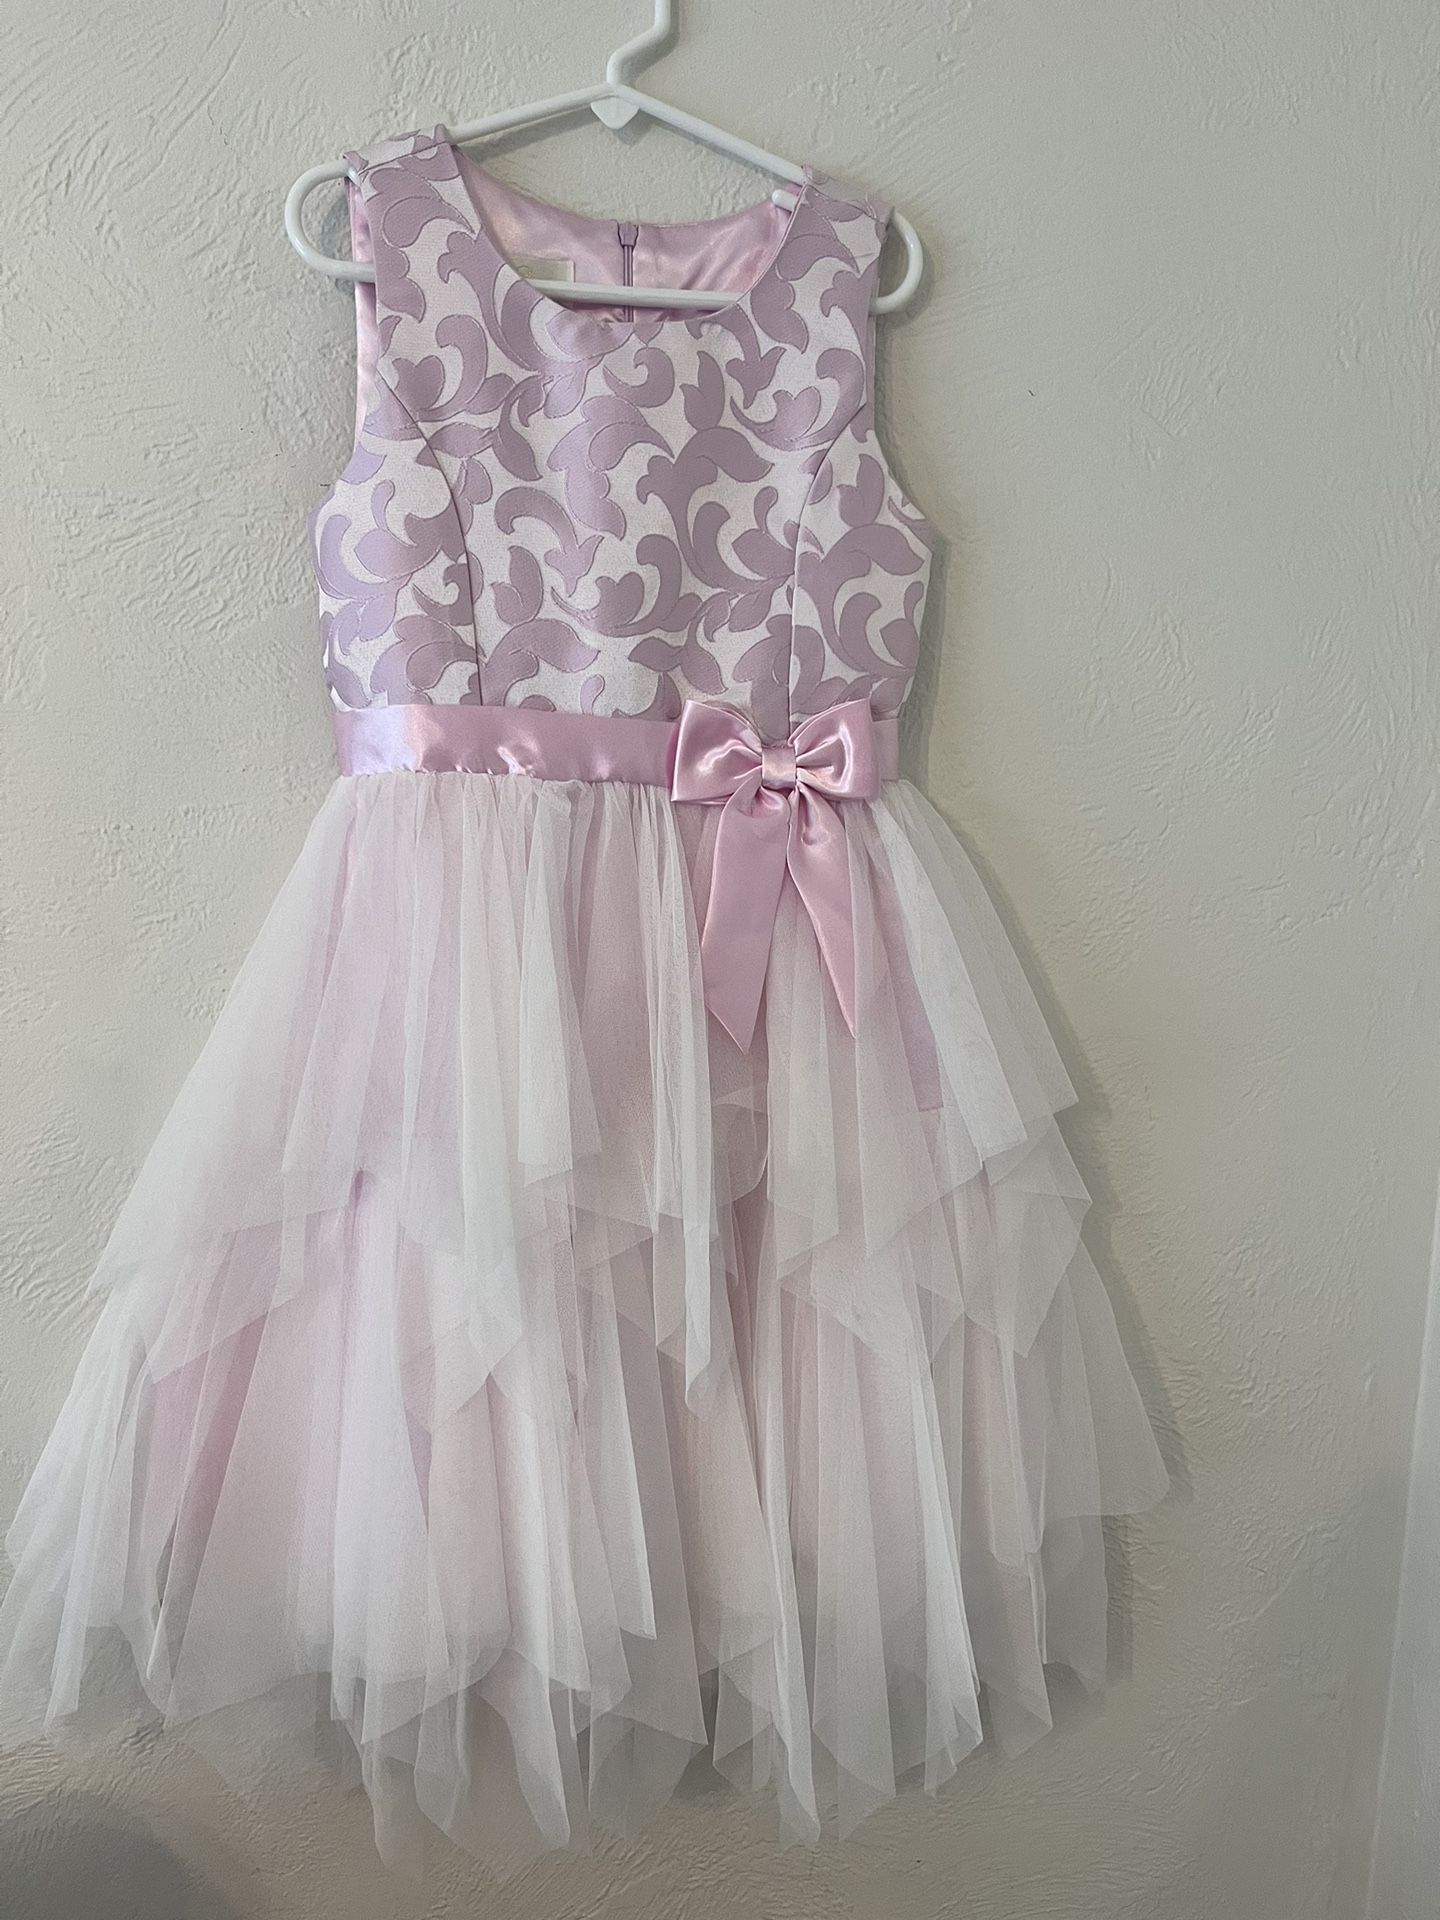 Girls American Princess Pink Formal Dress with Bowtie Size 8